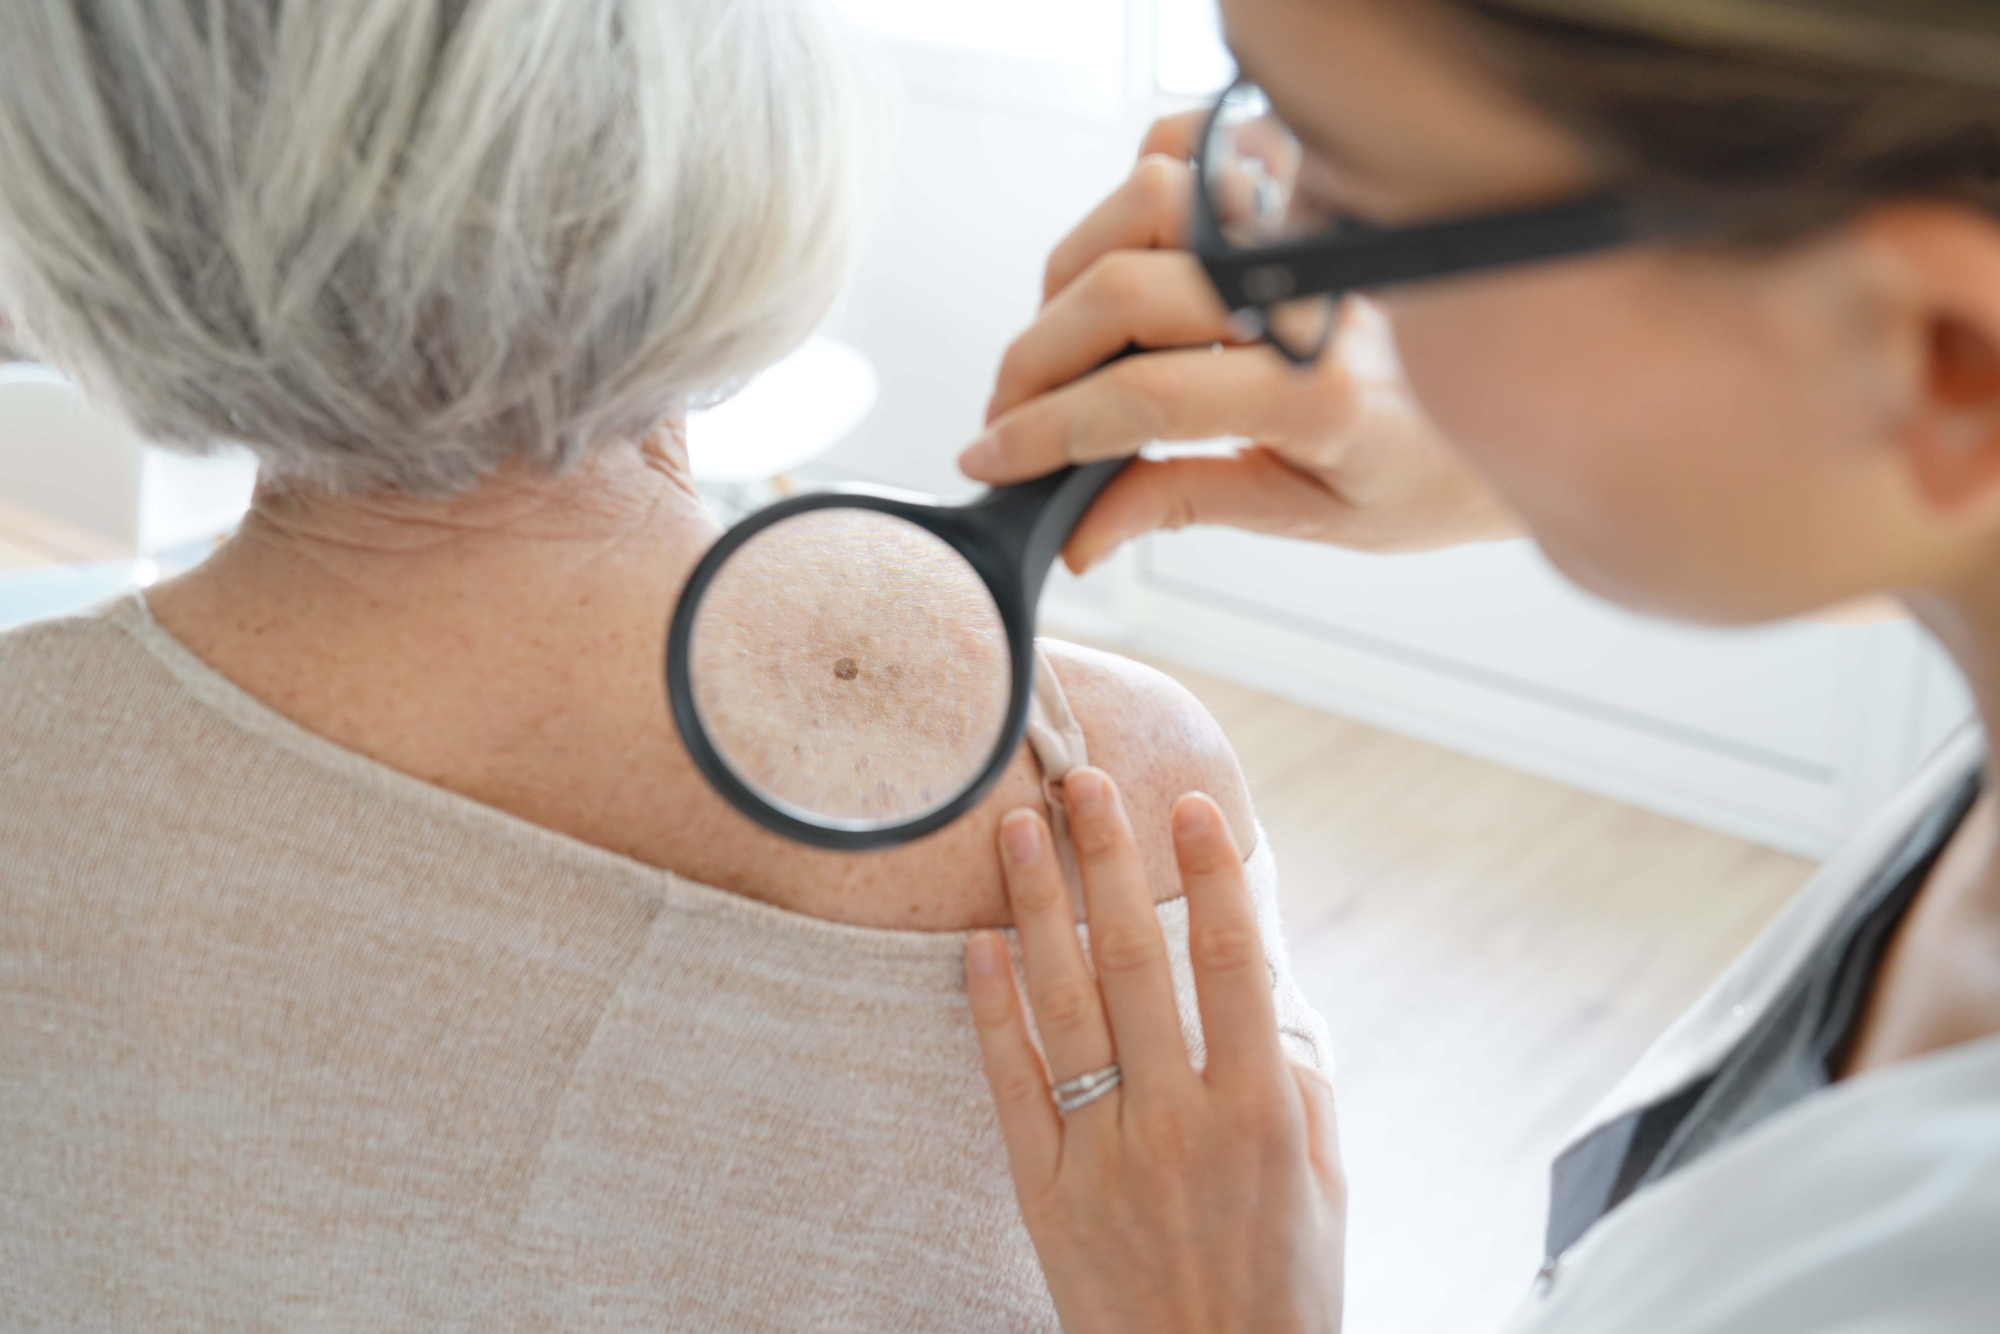 What to expect during yearly skin exam